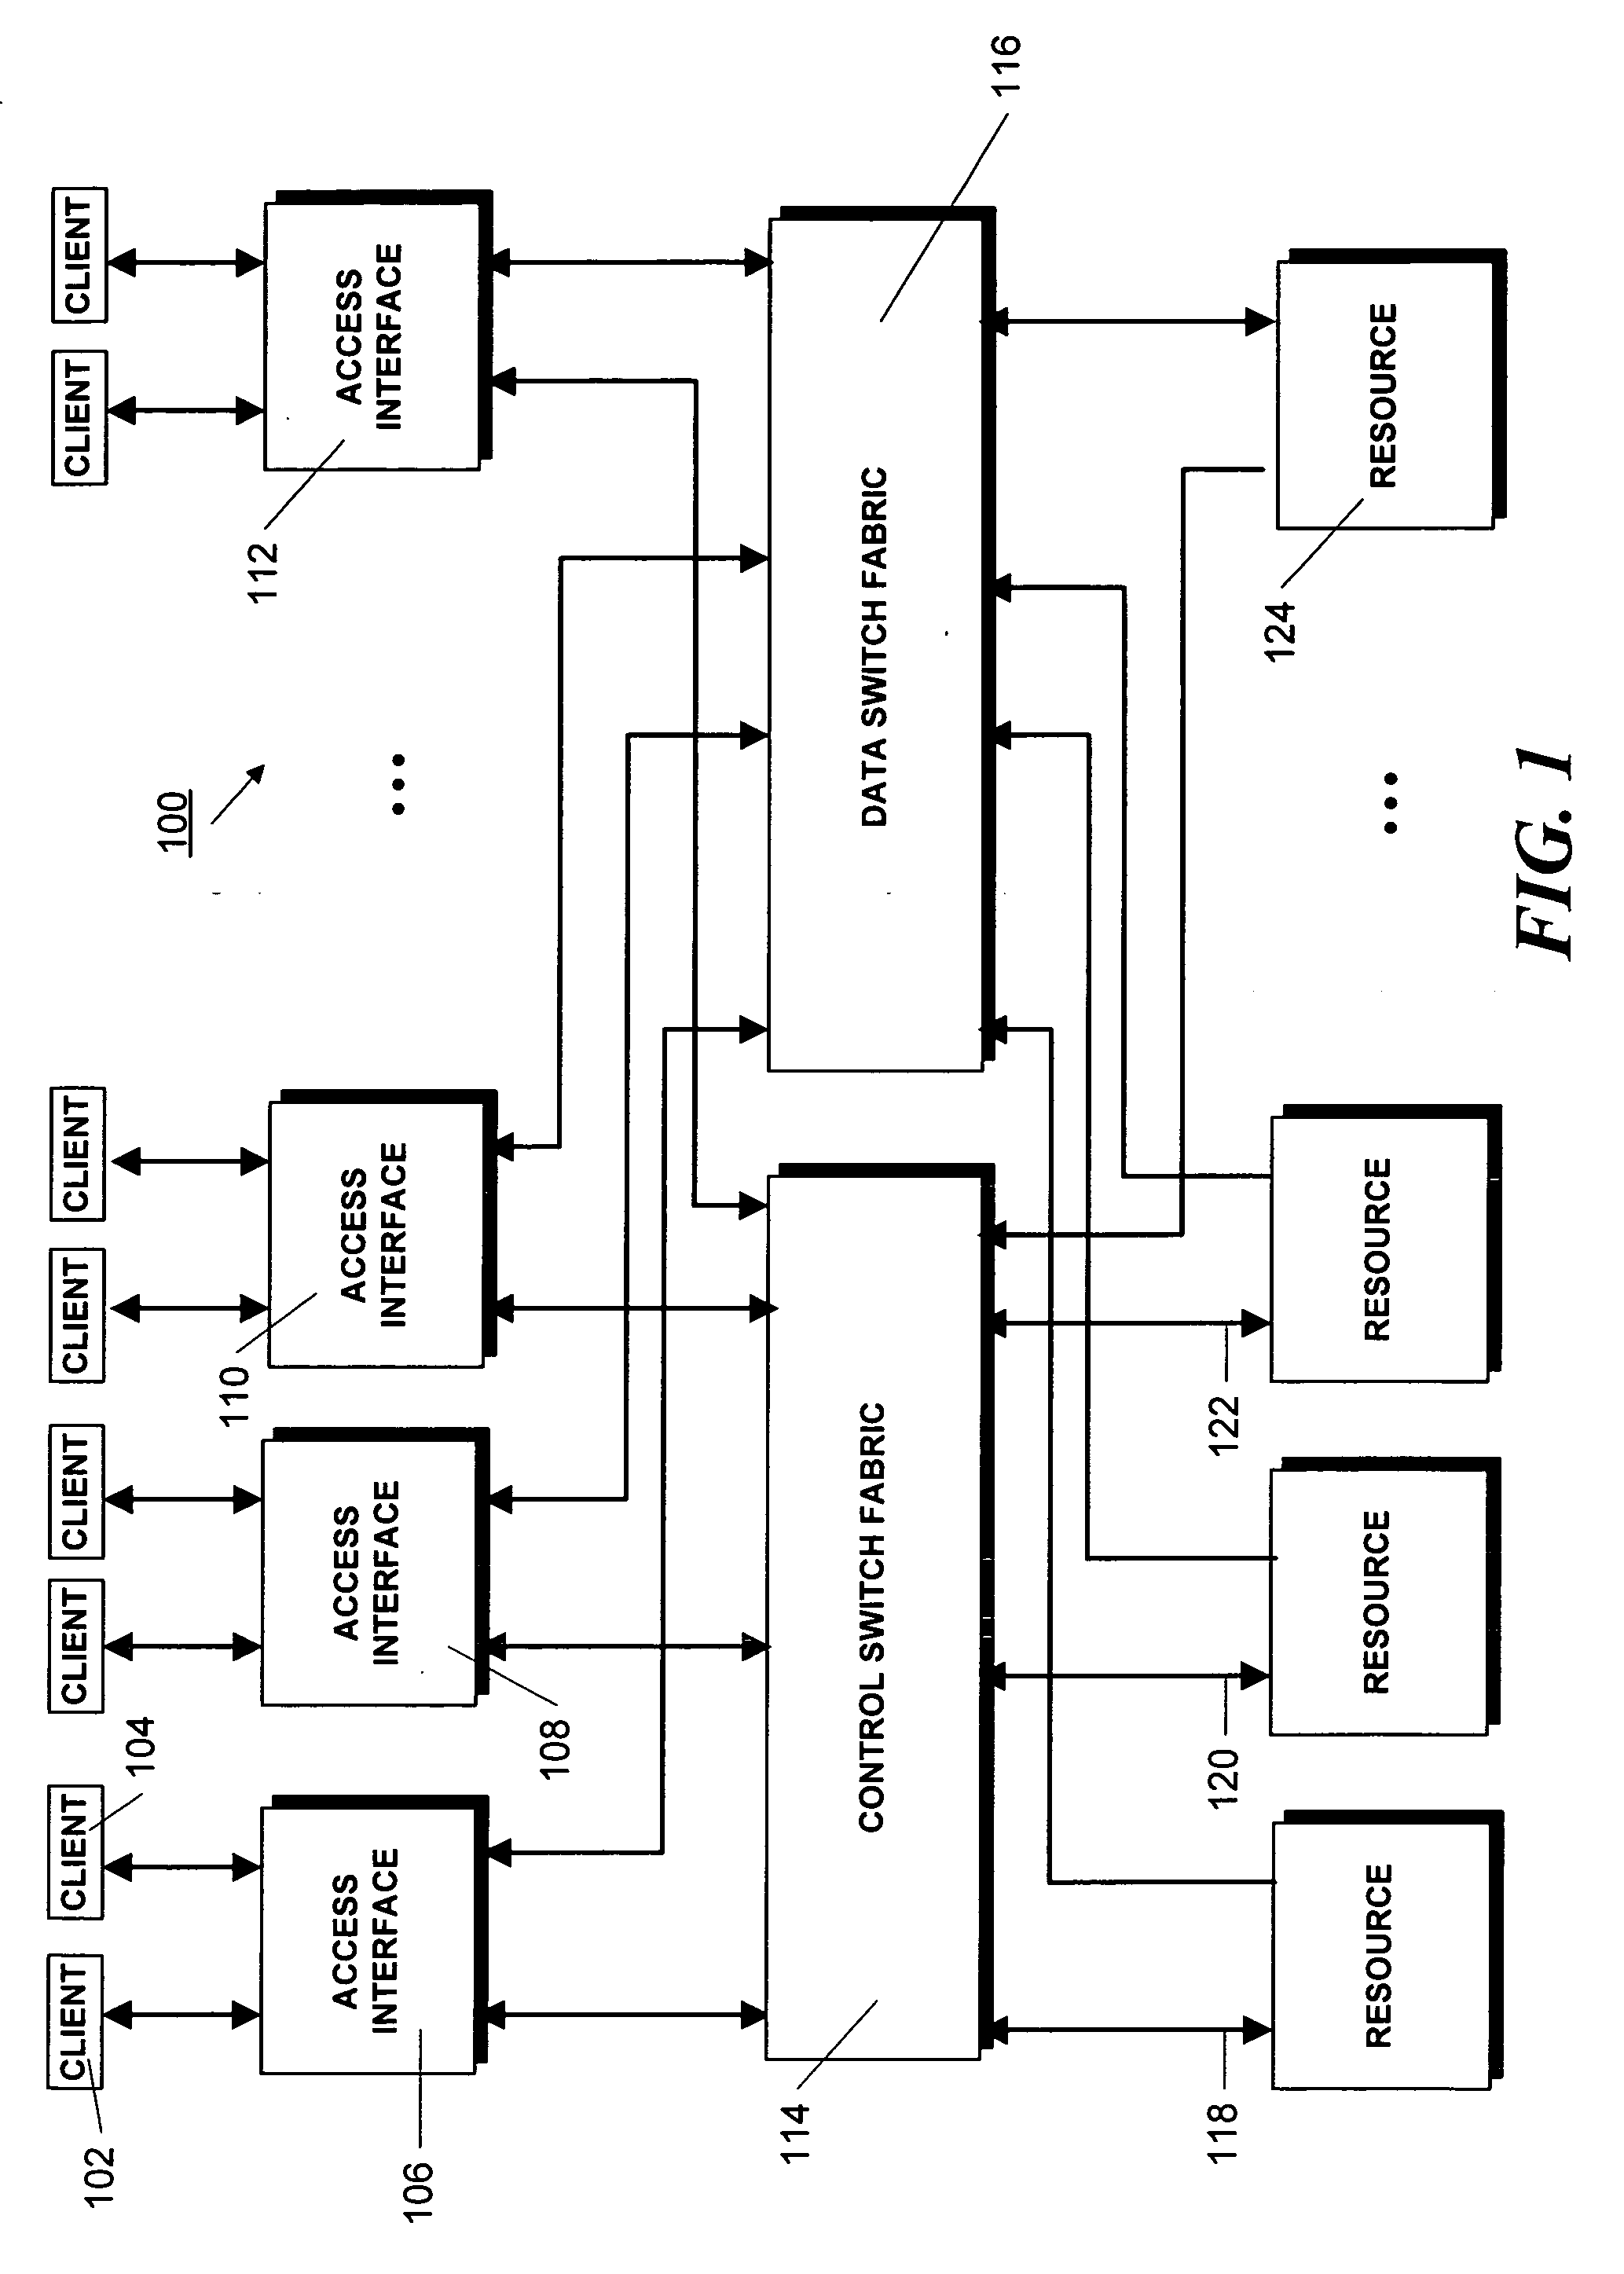 Method and apparatus for implementing high-performance, scaleable data processing and storage systems